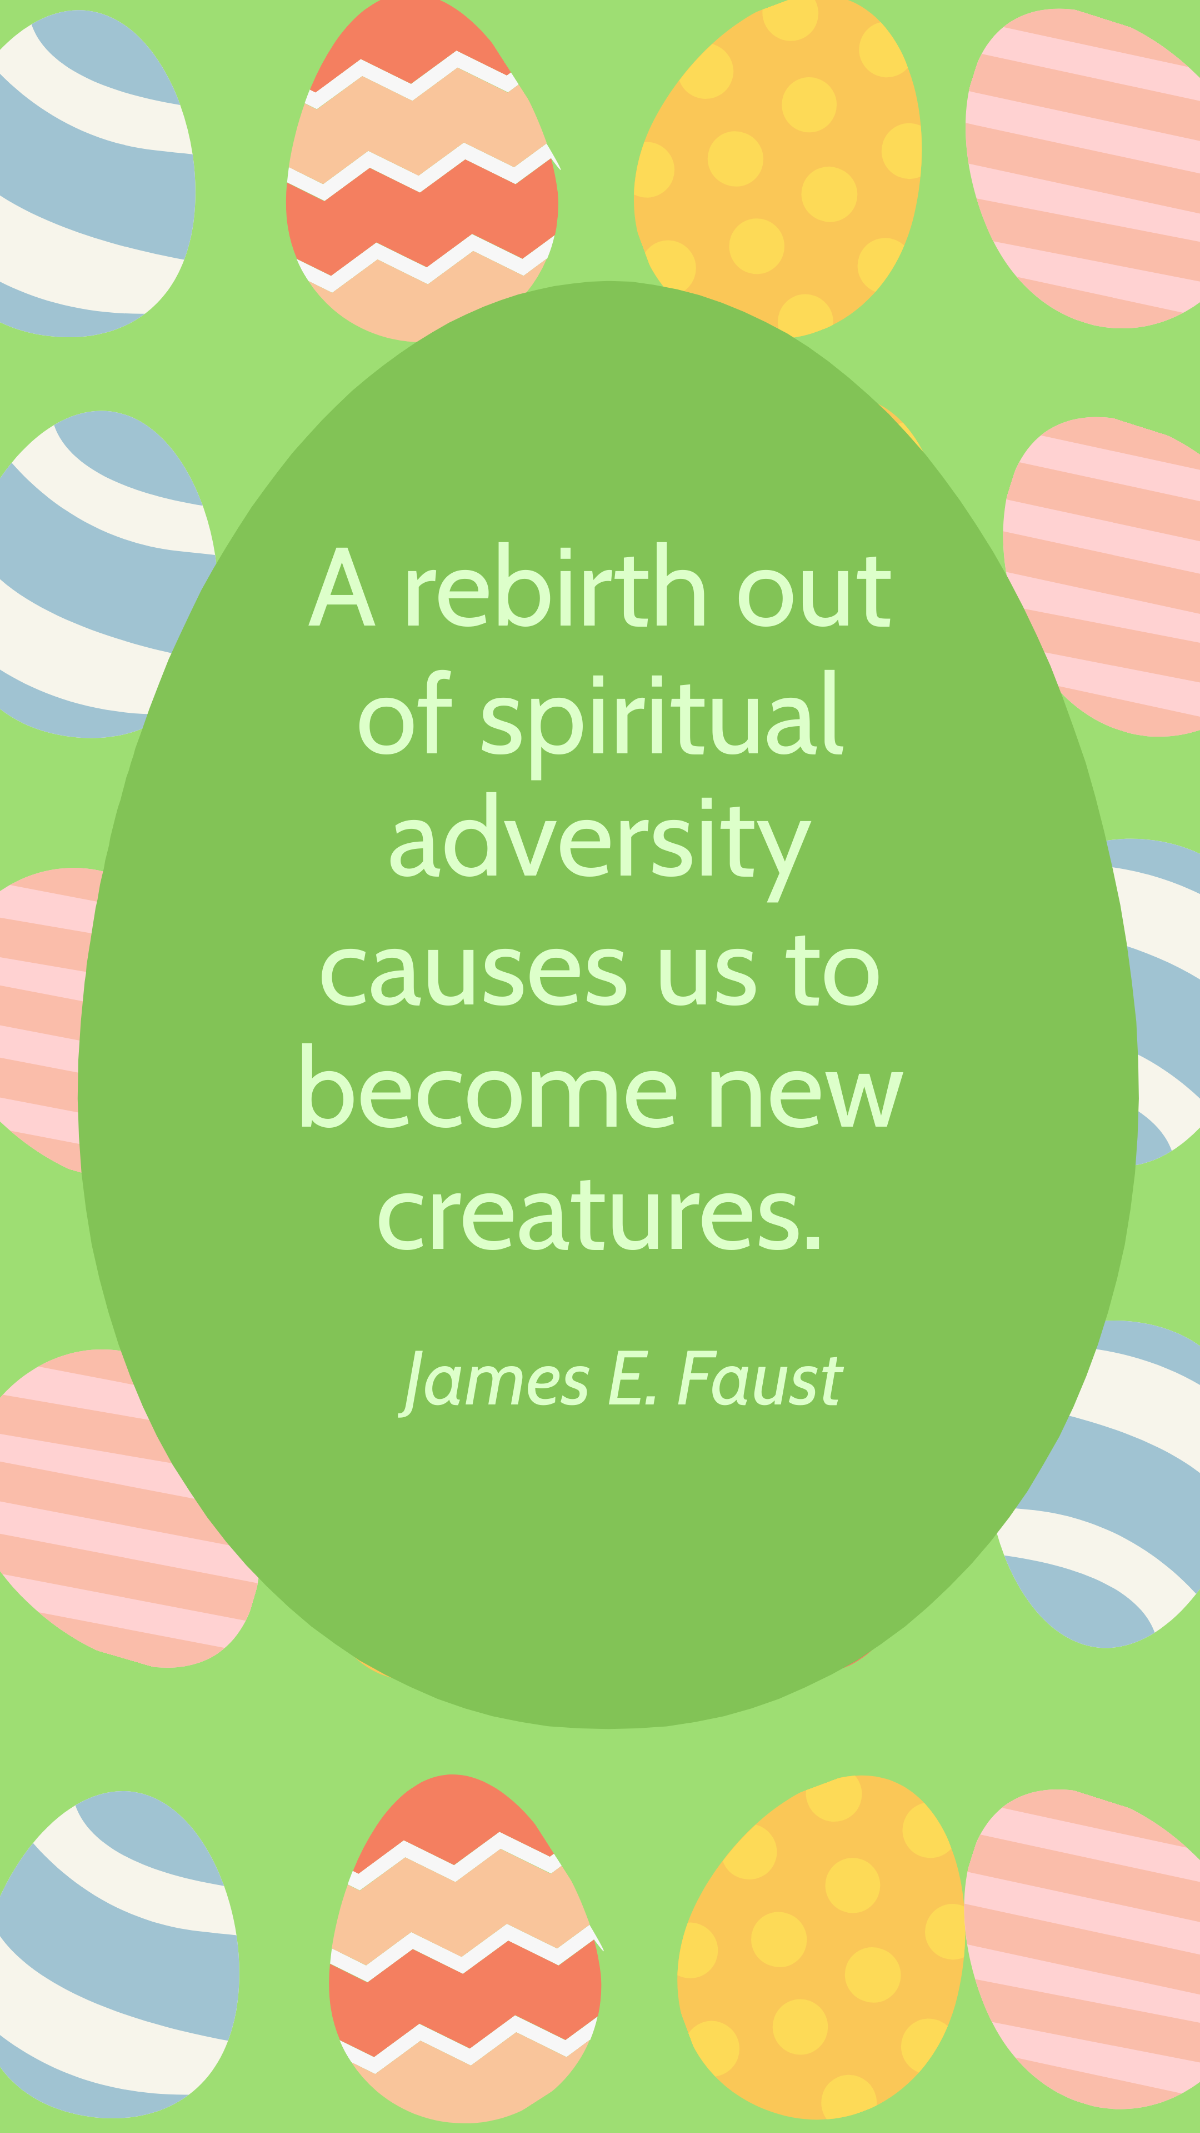 James E. Faust - A rebirth out of spiritual adversity causes us to become new creatures. Template